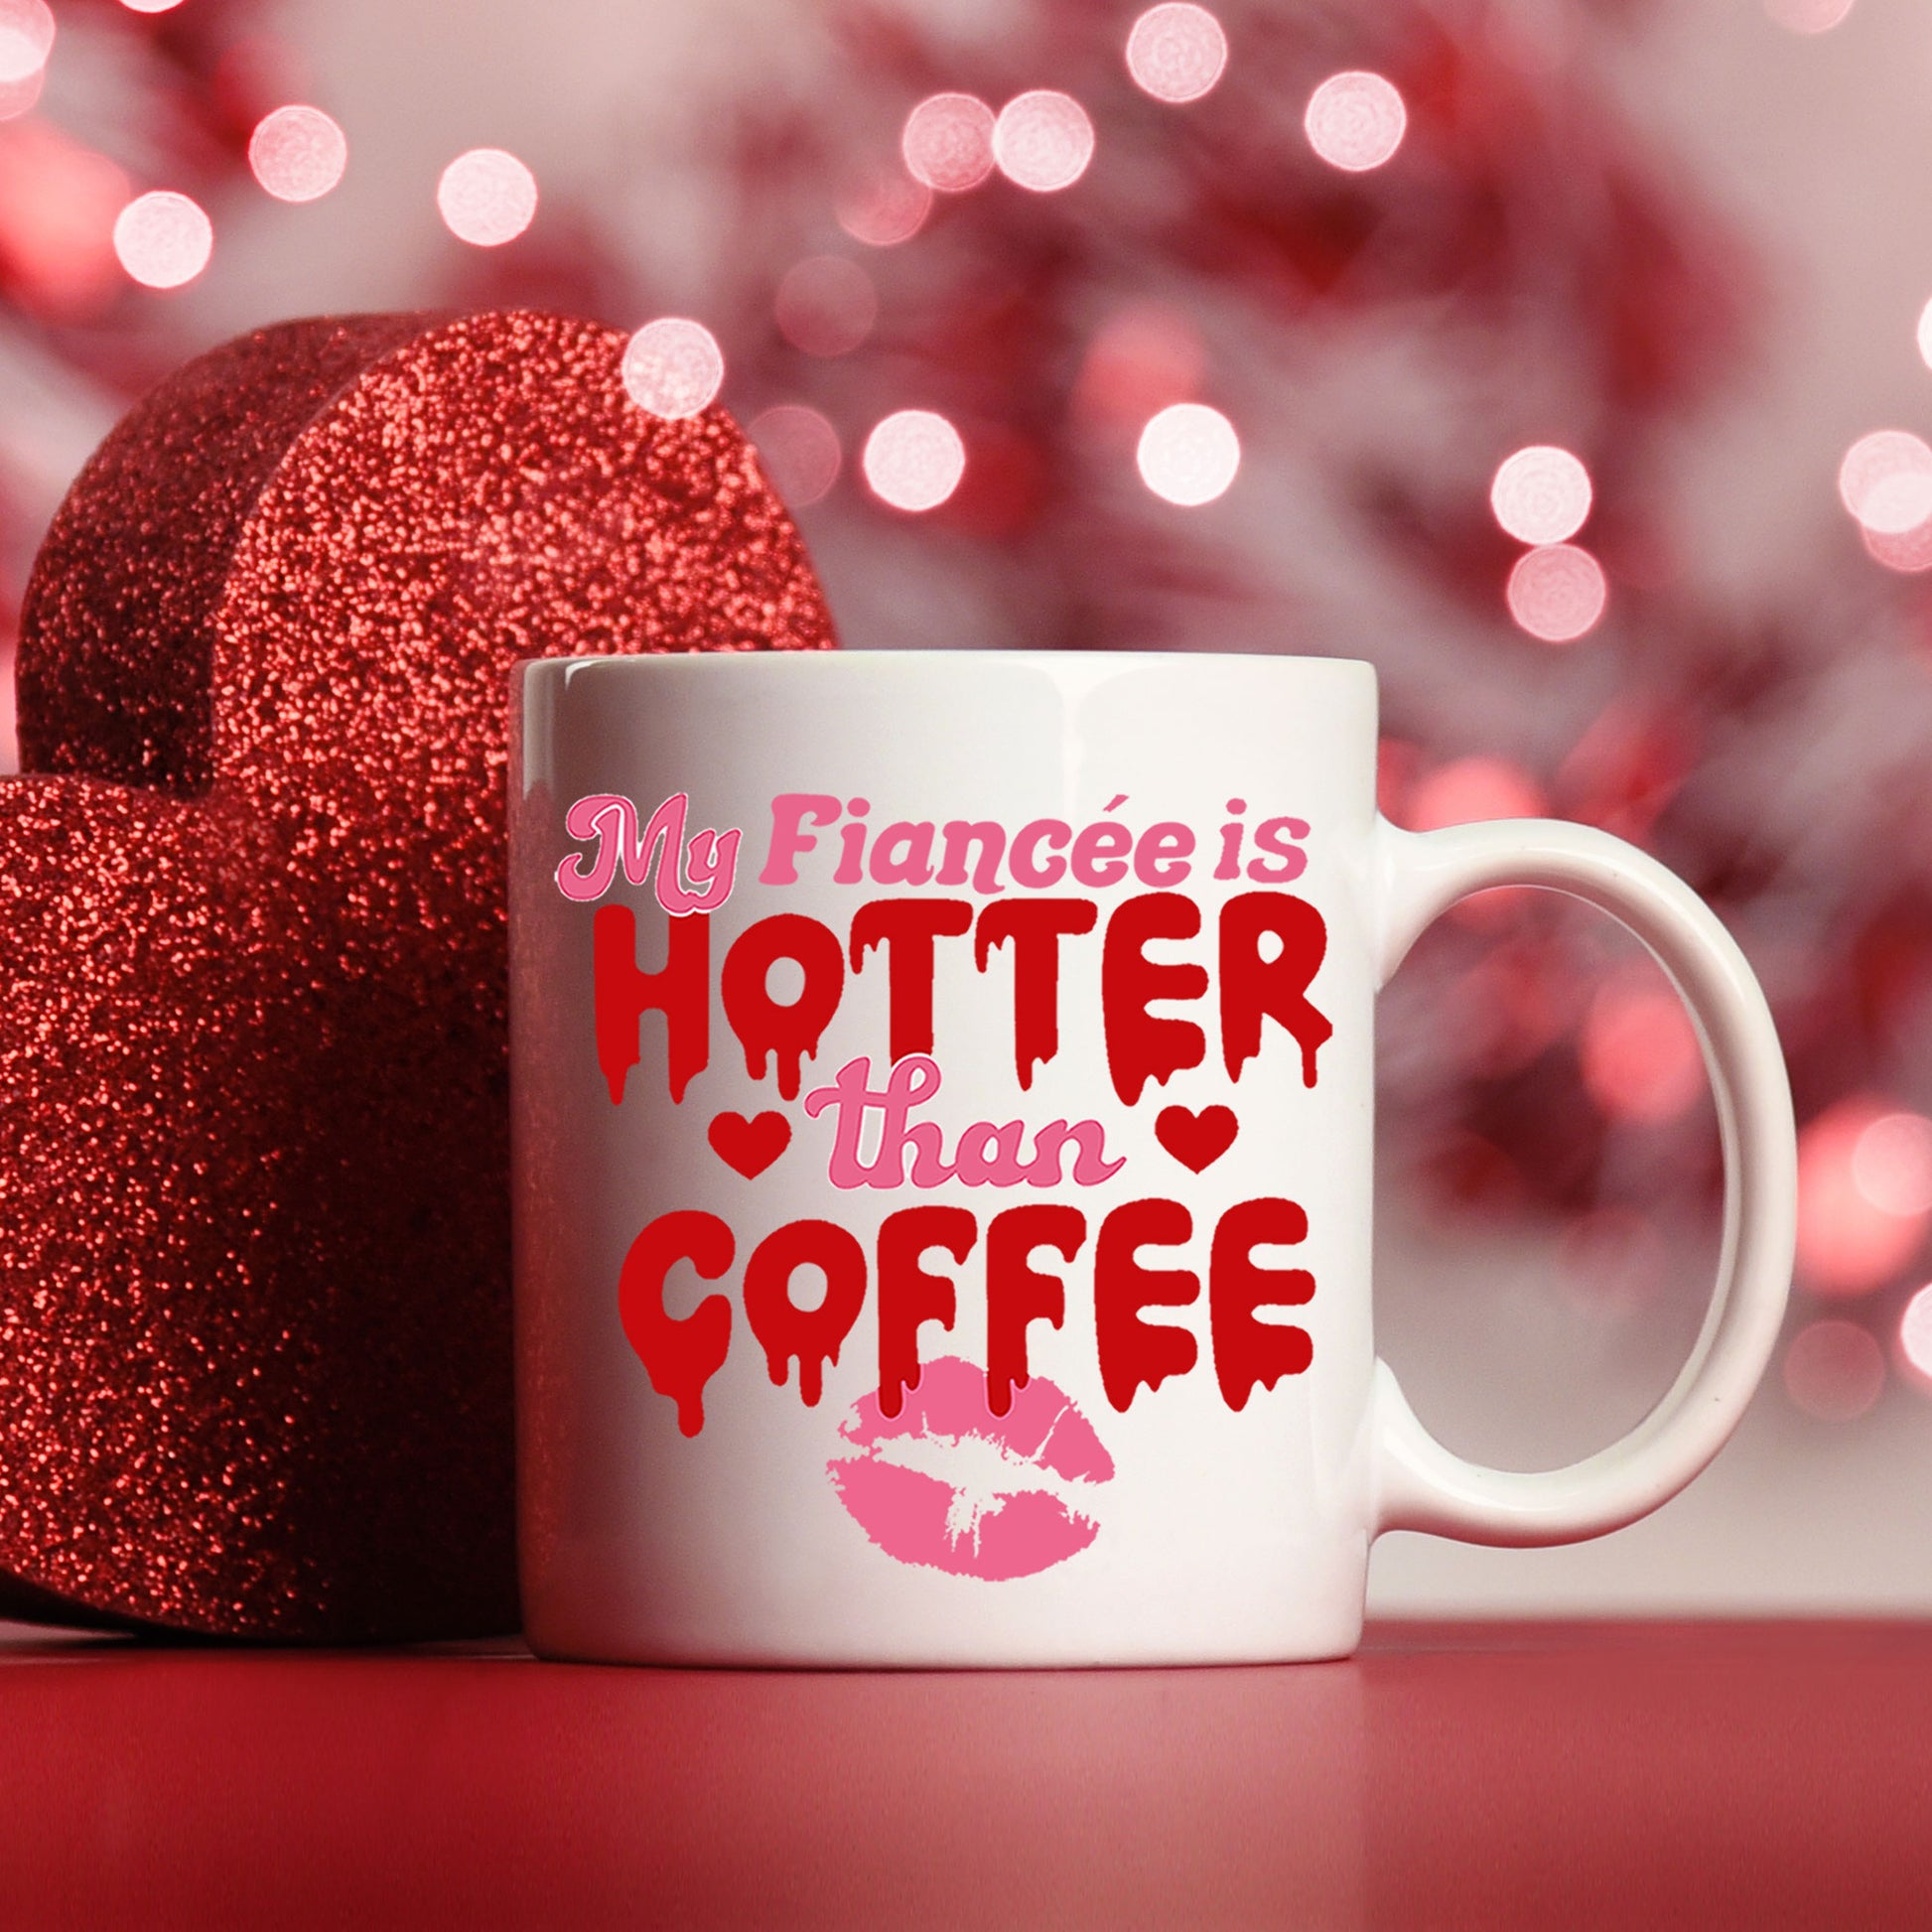 My Fiancé/Fiancée Is Hotter Than Coffee Mug and/or Coaster Gift  - Always Looking Good - Fiancée Mug On Its Own  